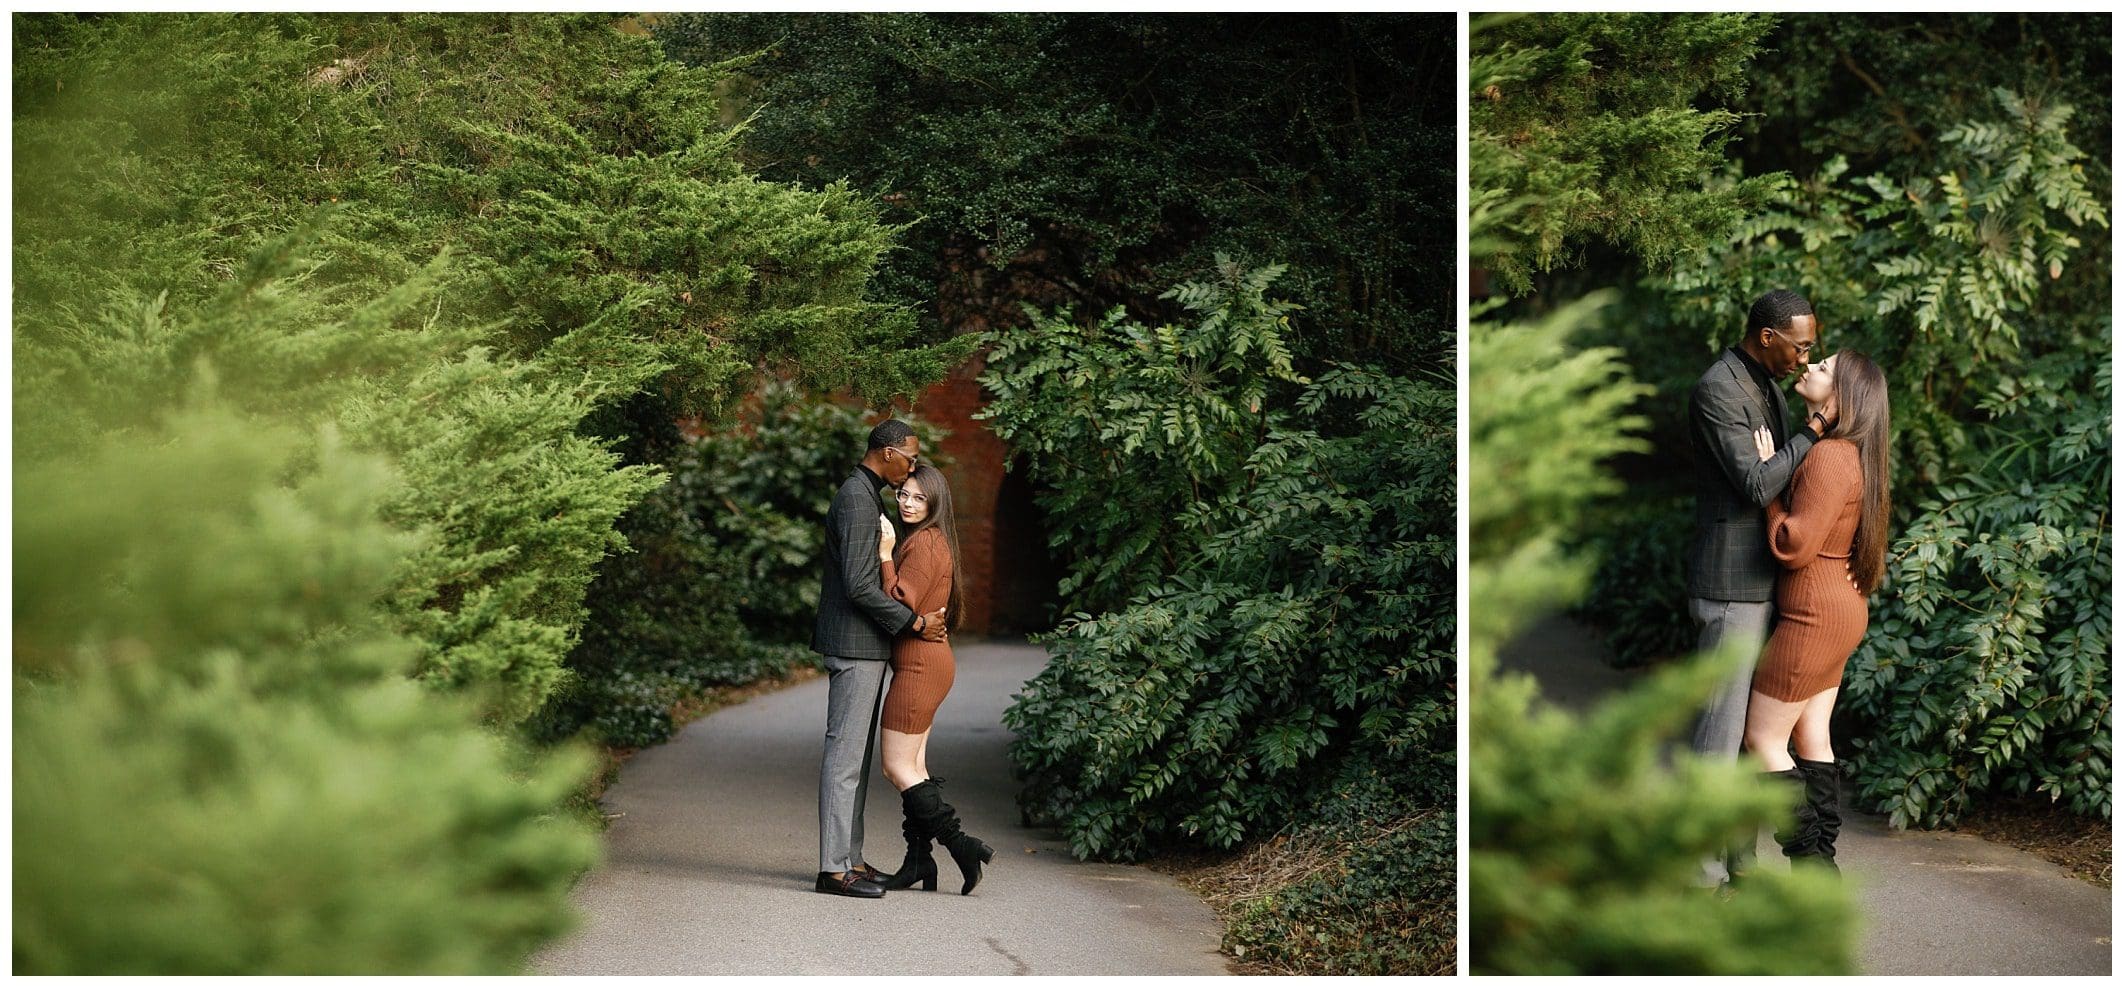 Winter engagement session in the gardens at Biltmore estate